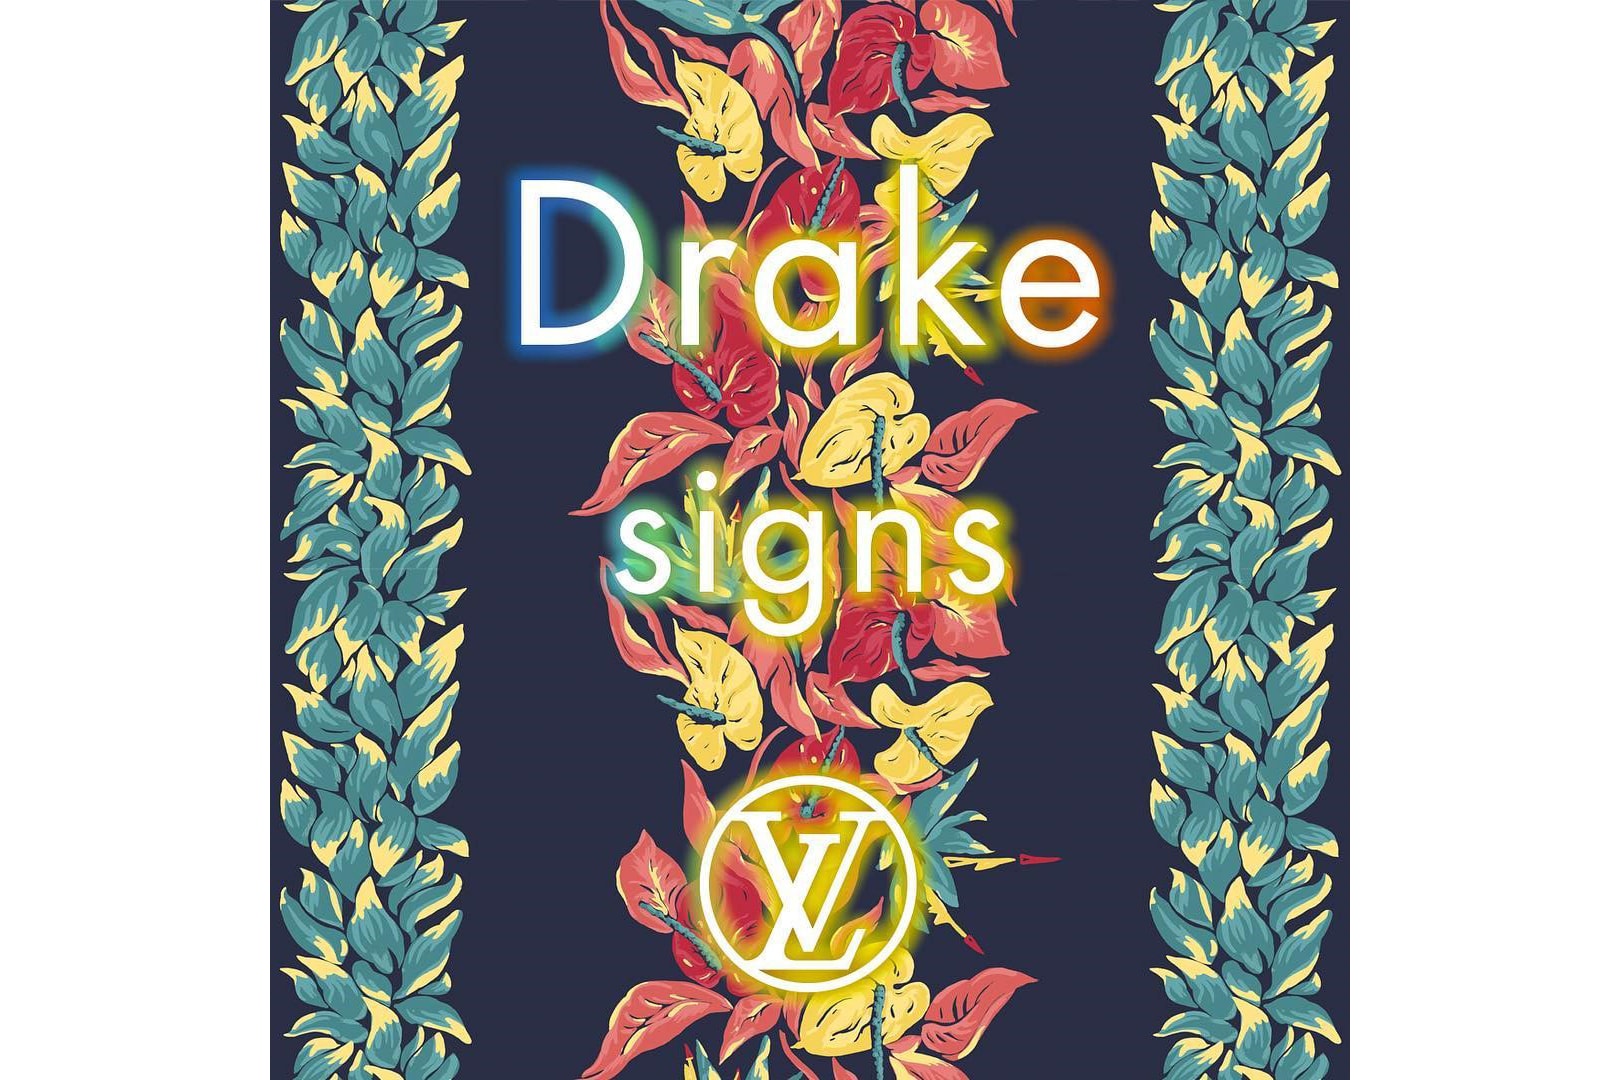 Drake will release his new single Signs on 2018SS Louis Vuitton runway show in Paris